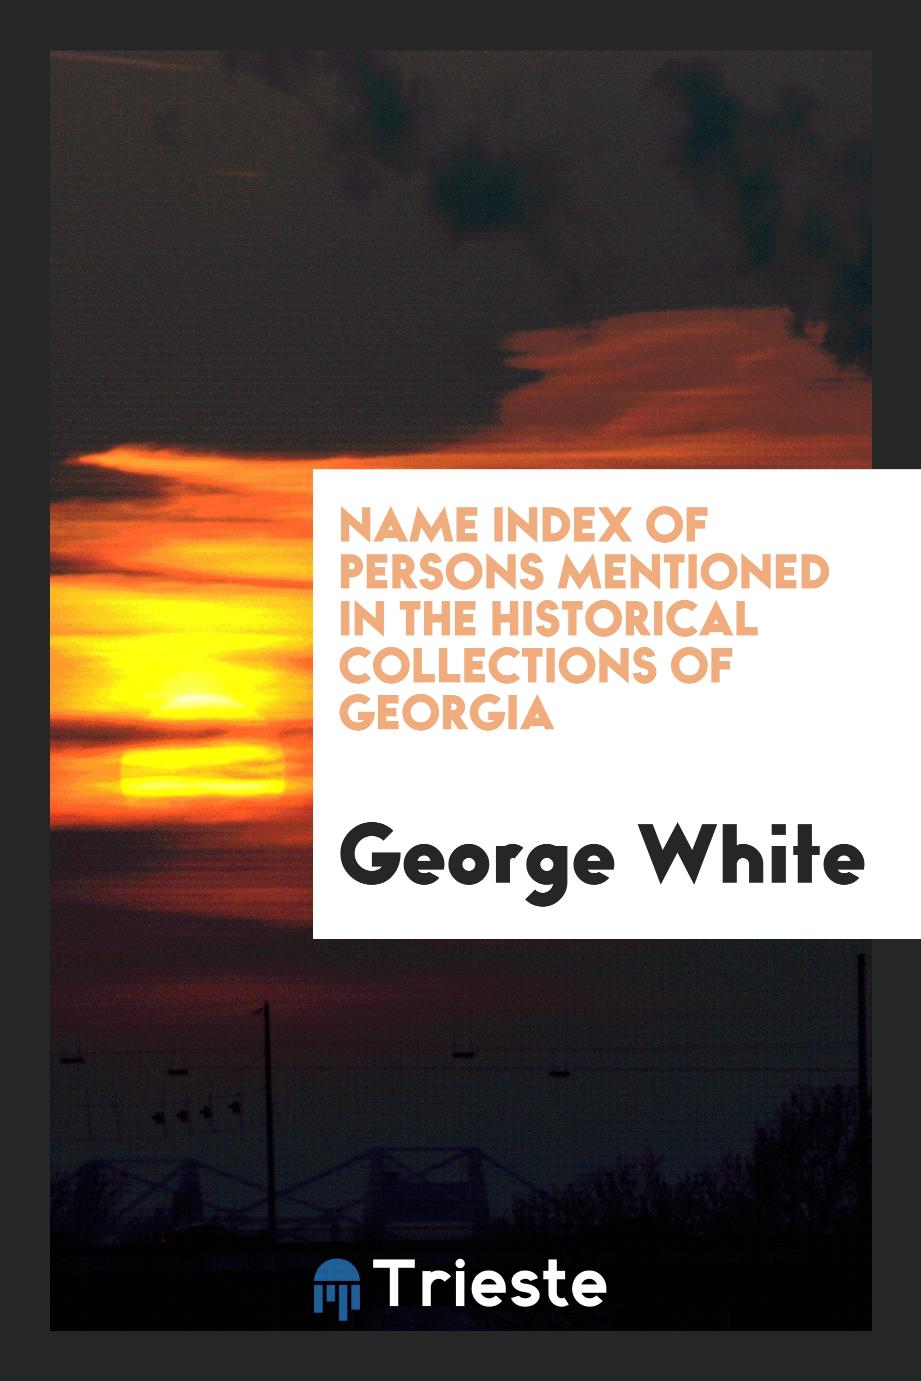 Name index of persons mentioned in the Historical collections of Georgia